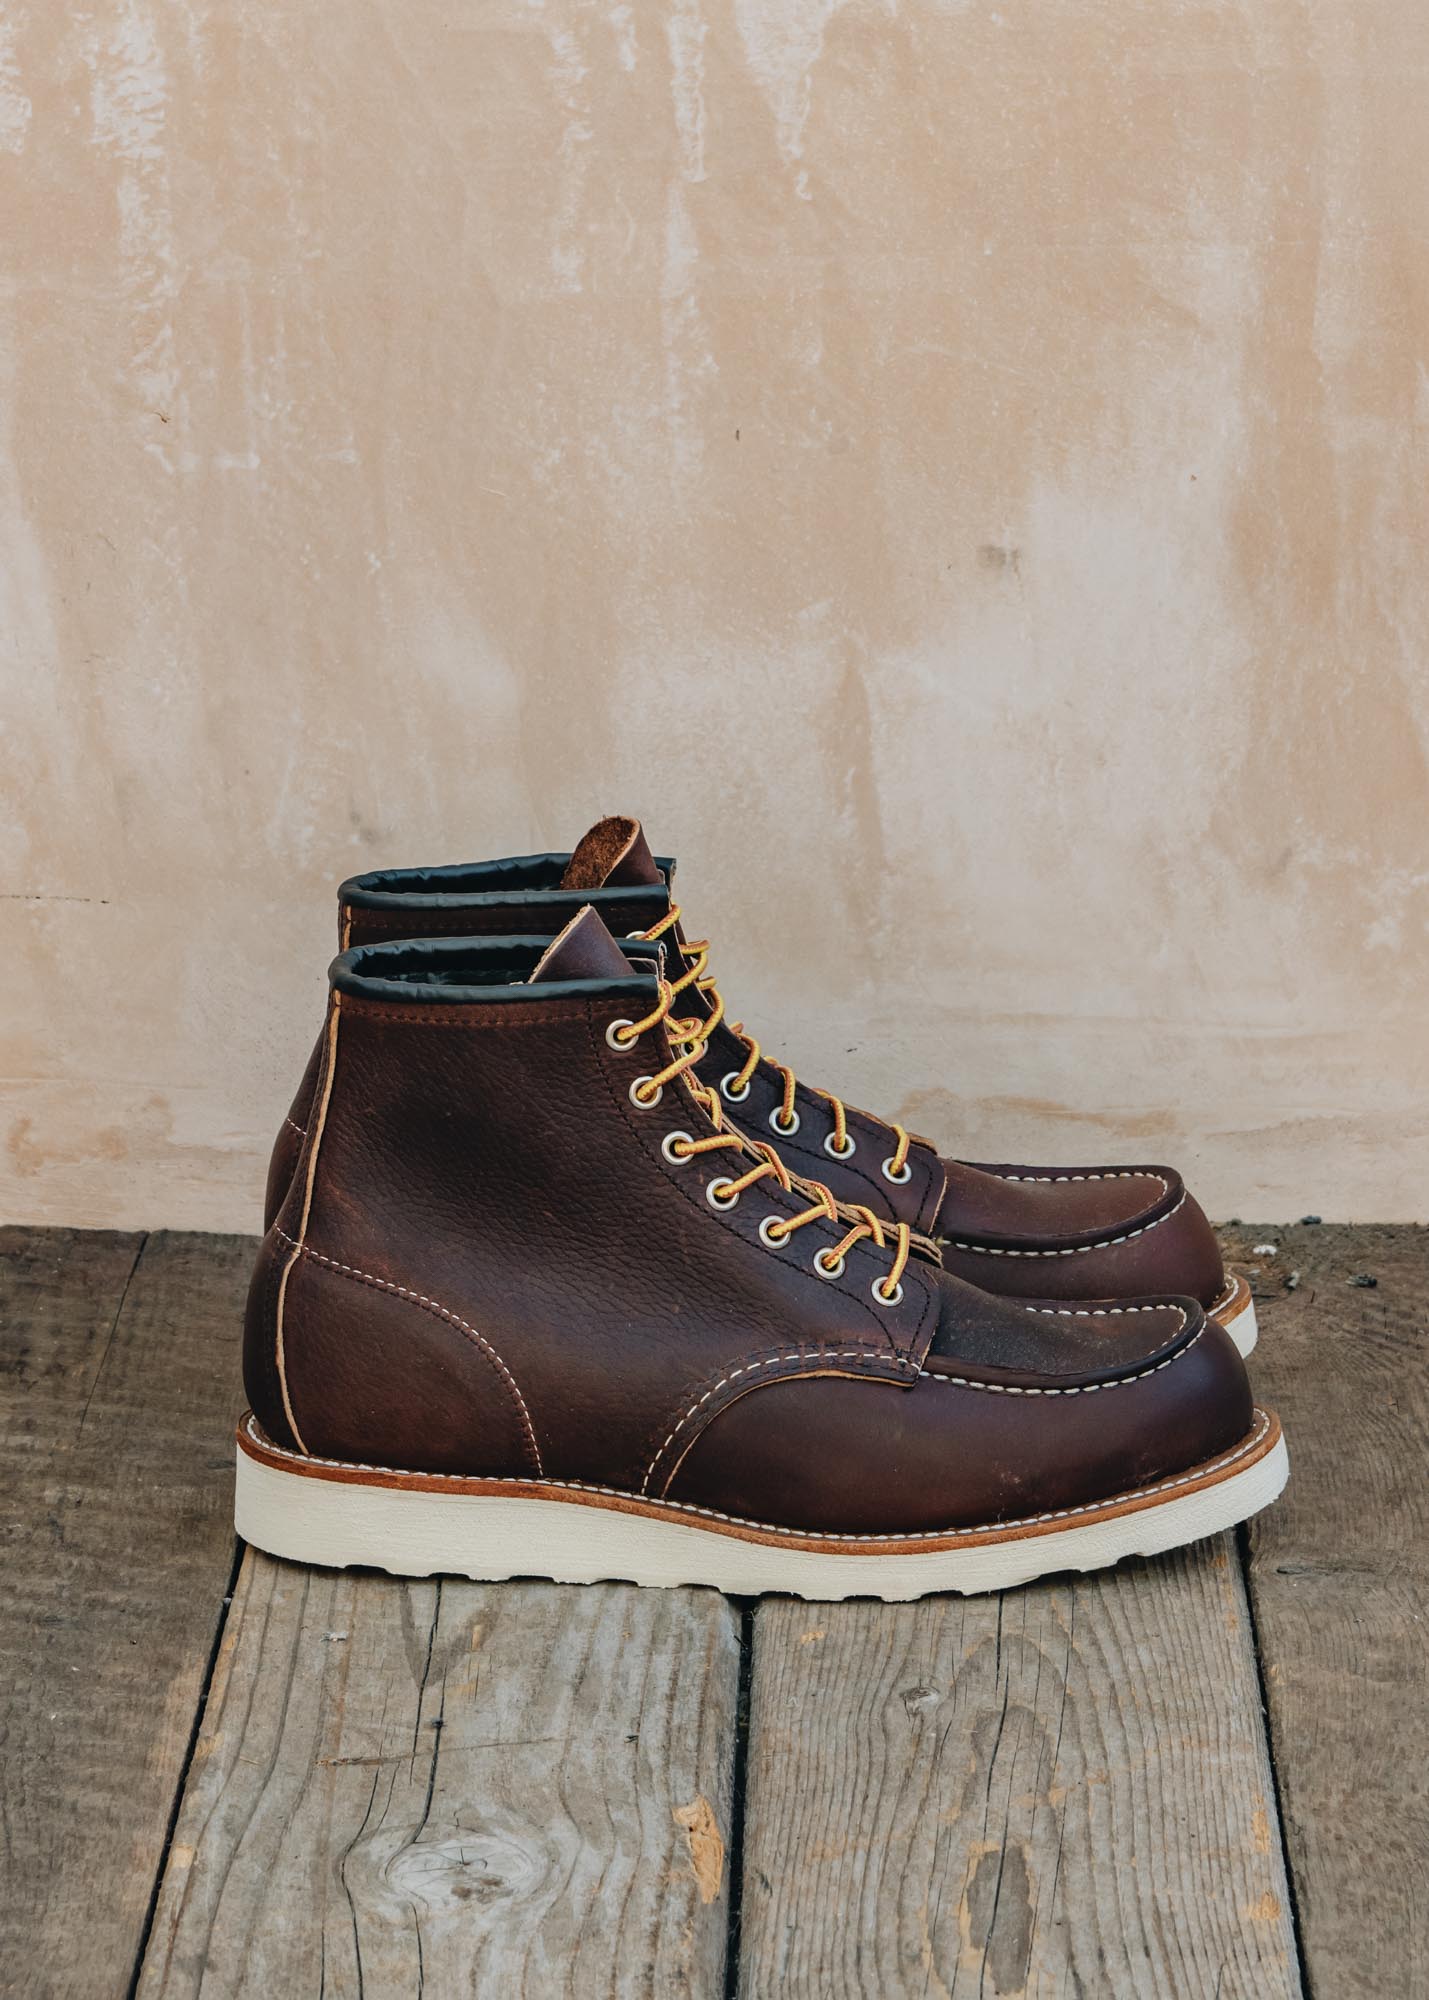 Red Wing Classic Moc Toe Boots in Briar Oil Slick